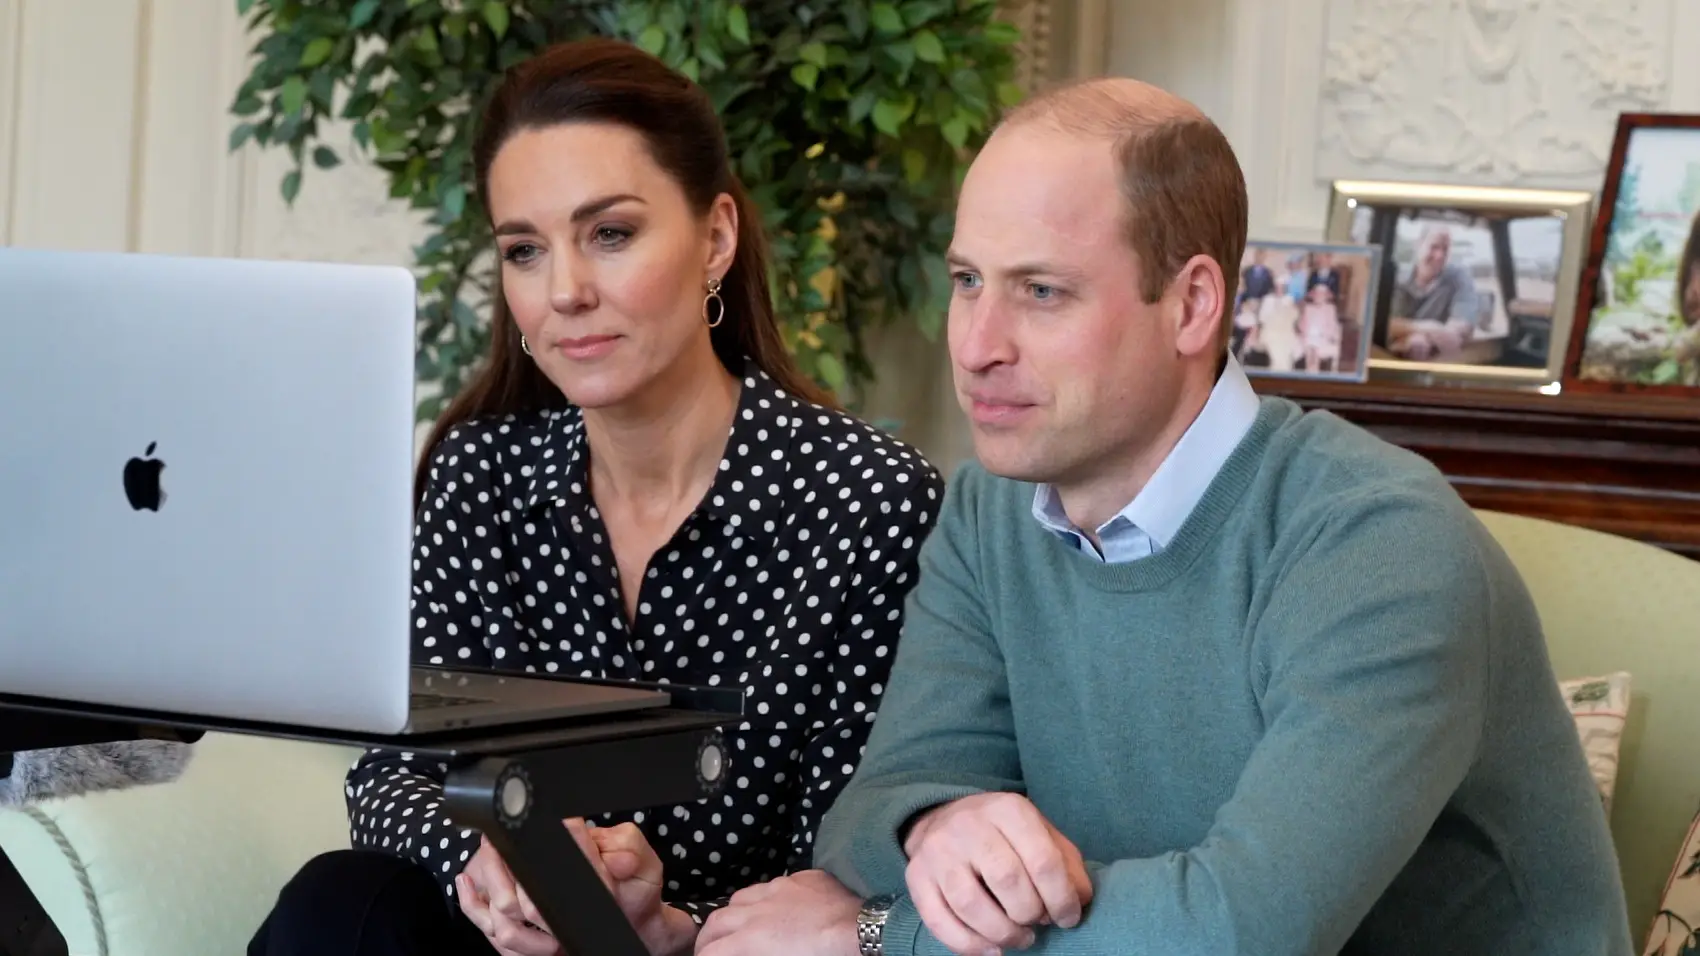 The Duke and Duchess of Cambridge earlier this week had a video call with a family whose son was helped by the Shout 85258 mental health support service.